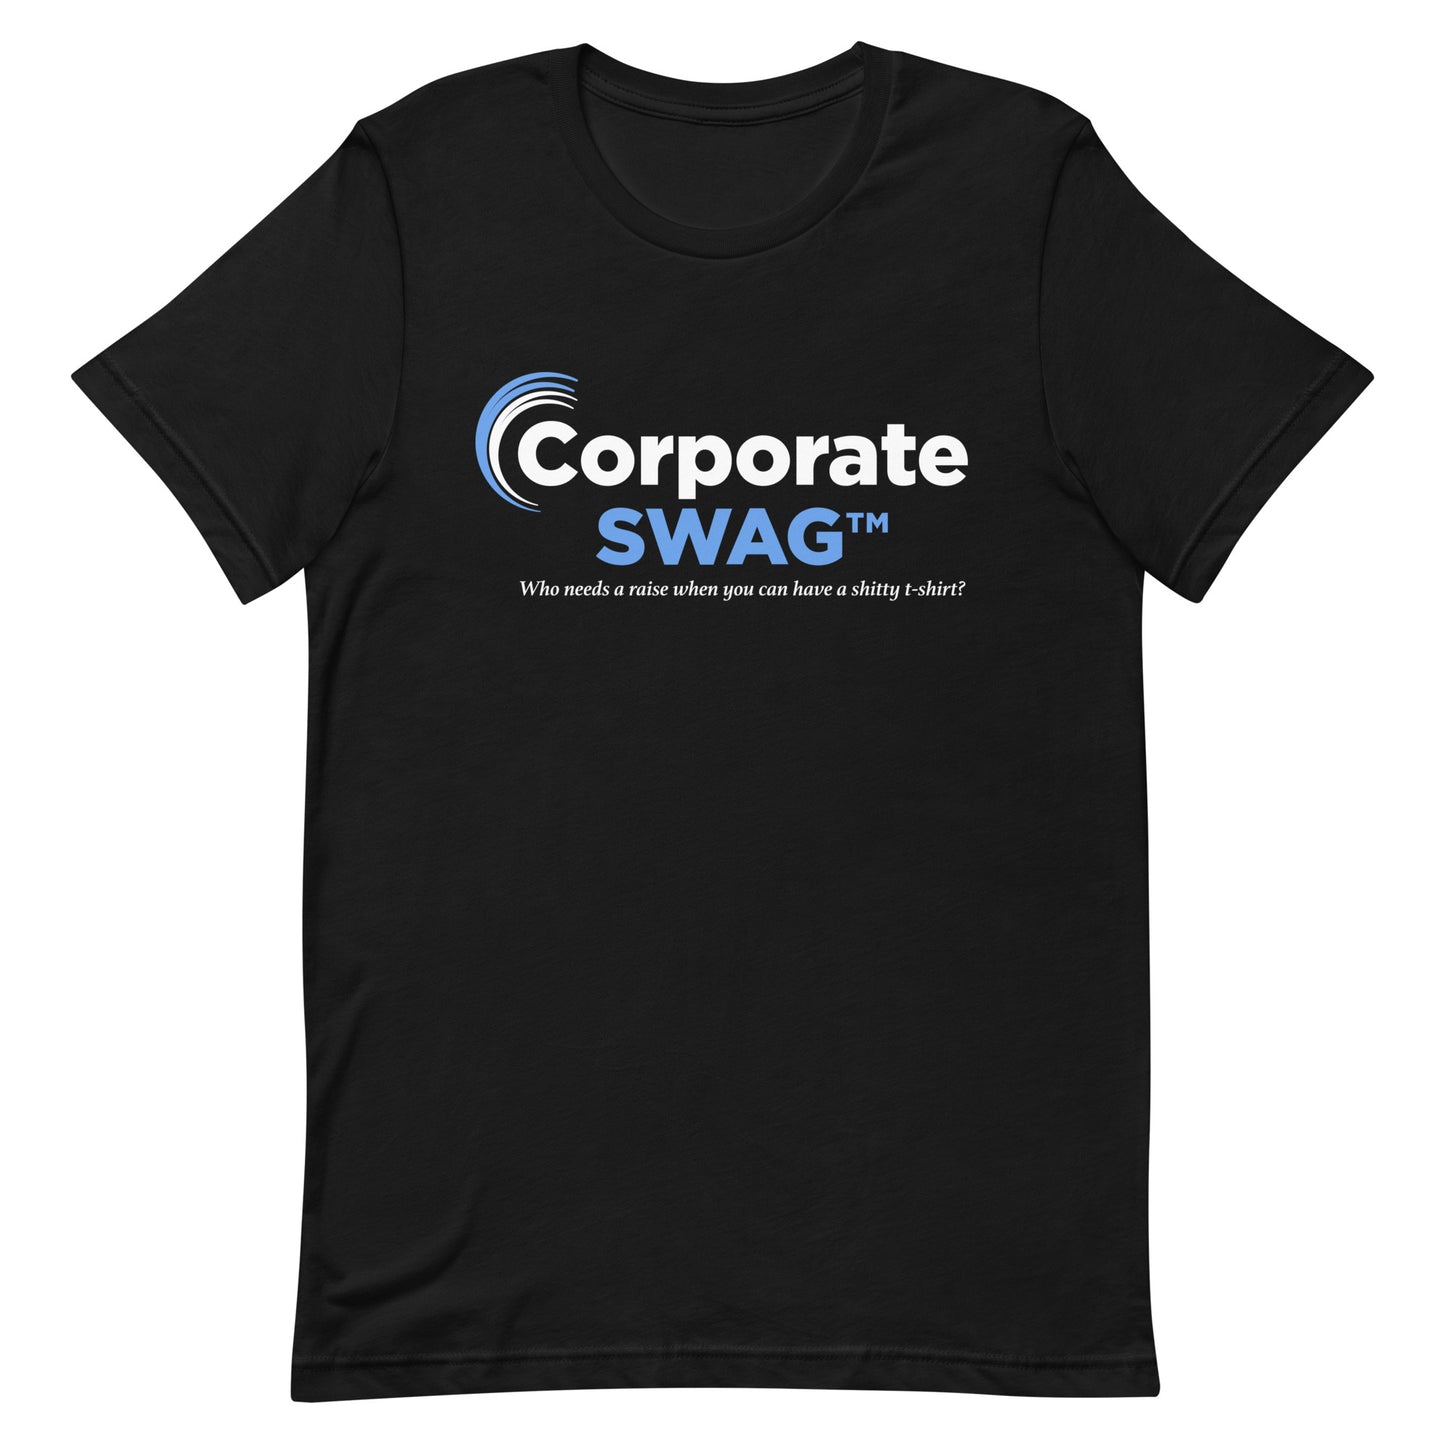 A black crewneck t-shirt featuring a generic blue and white logo and text that reads "Corporate Swag" "Who needs a raise when you can have a shitty t-shirt?"